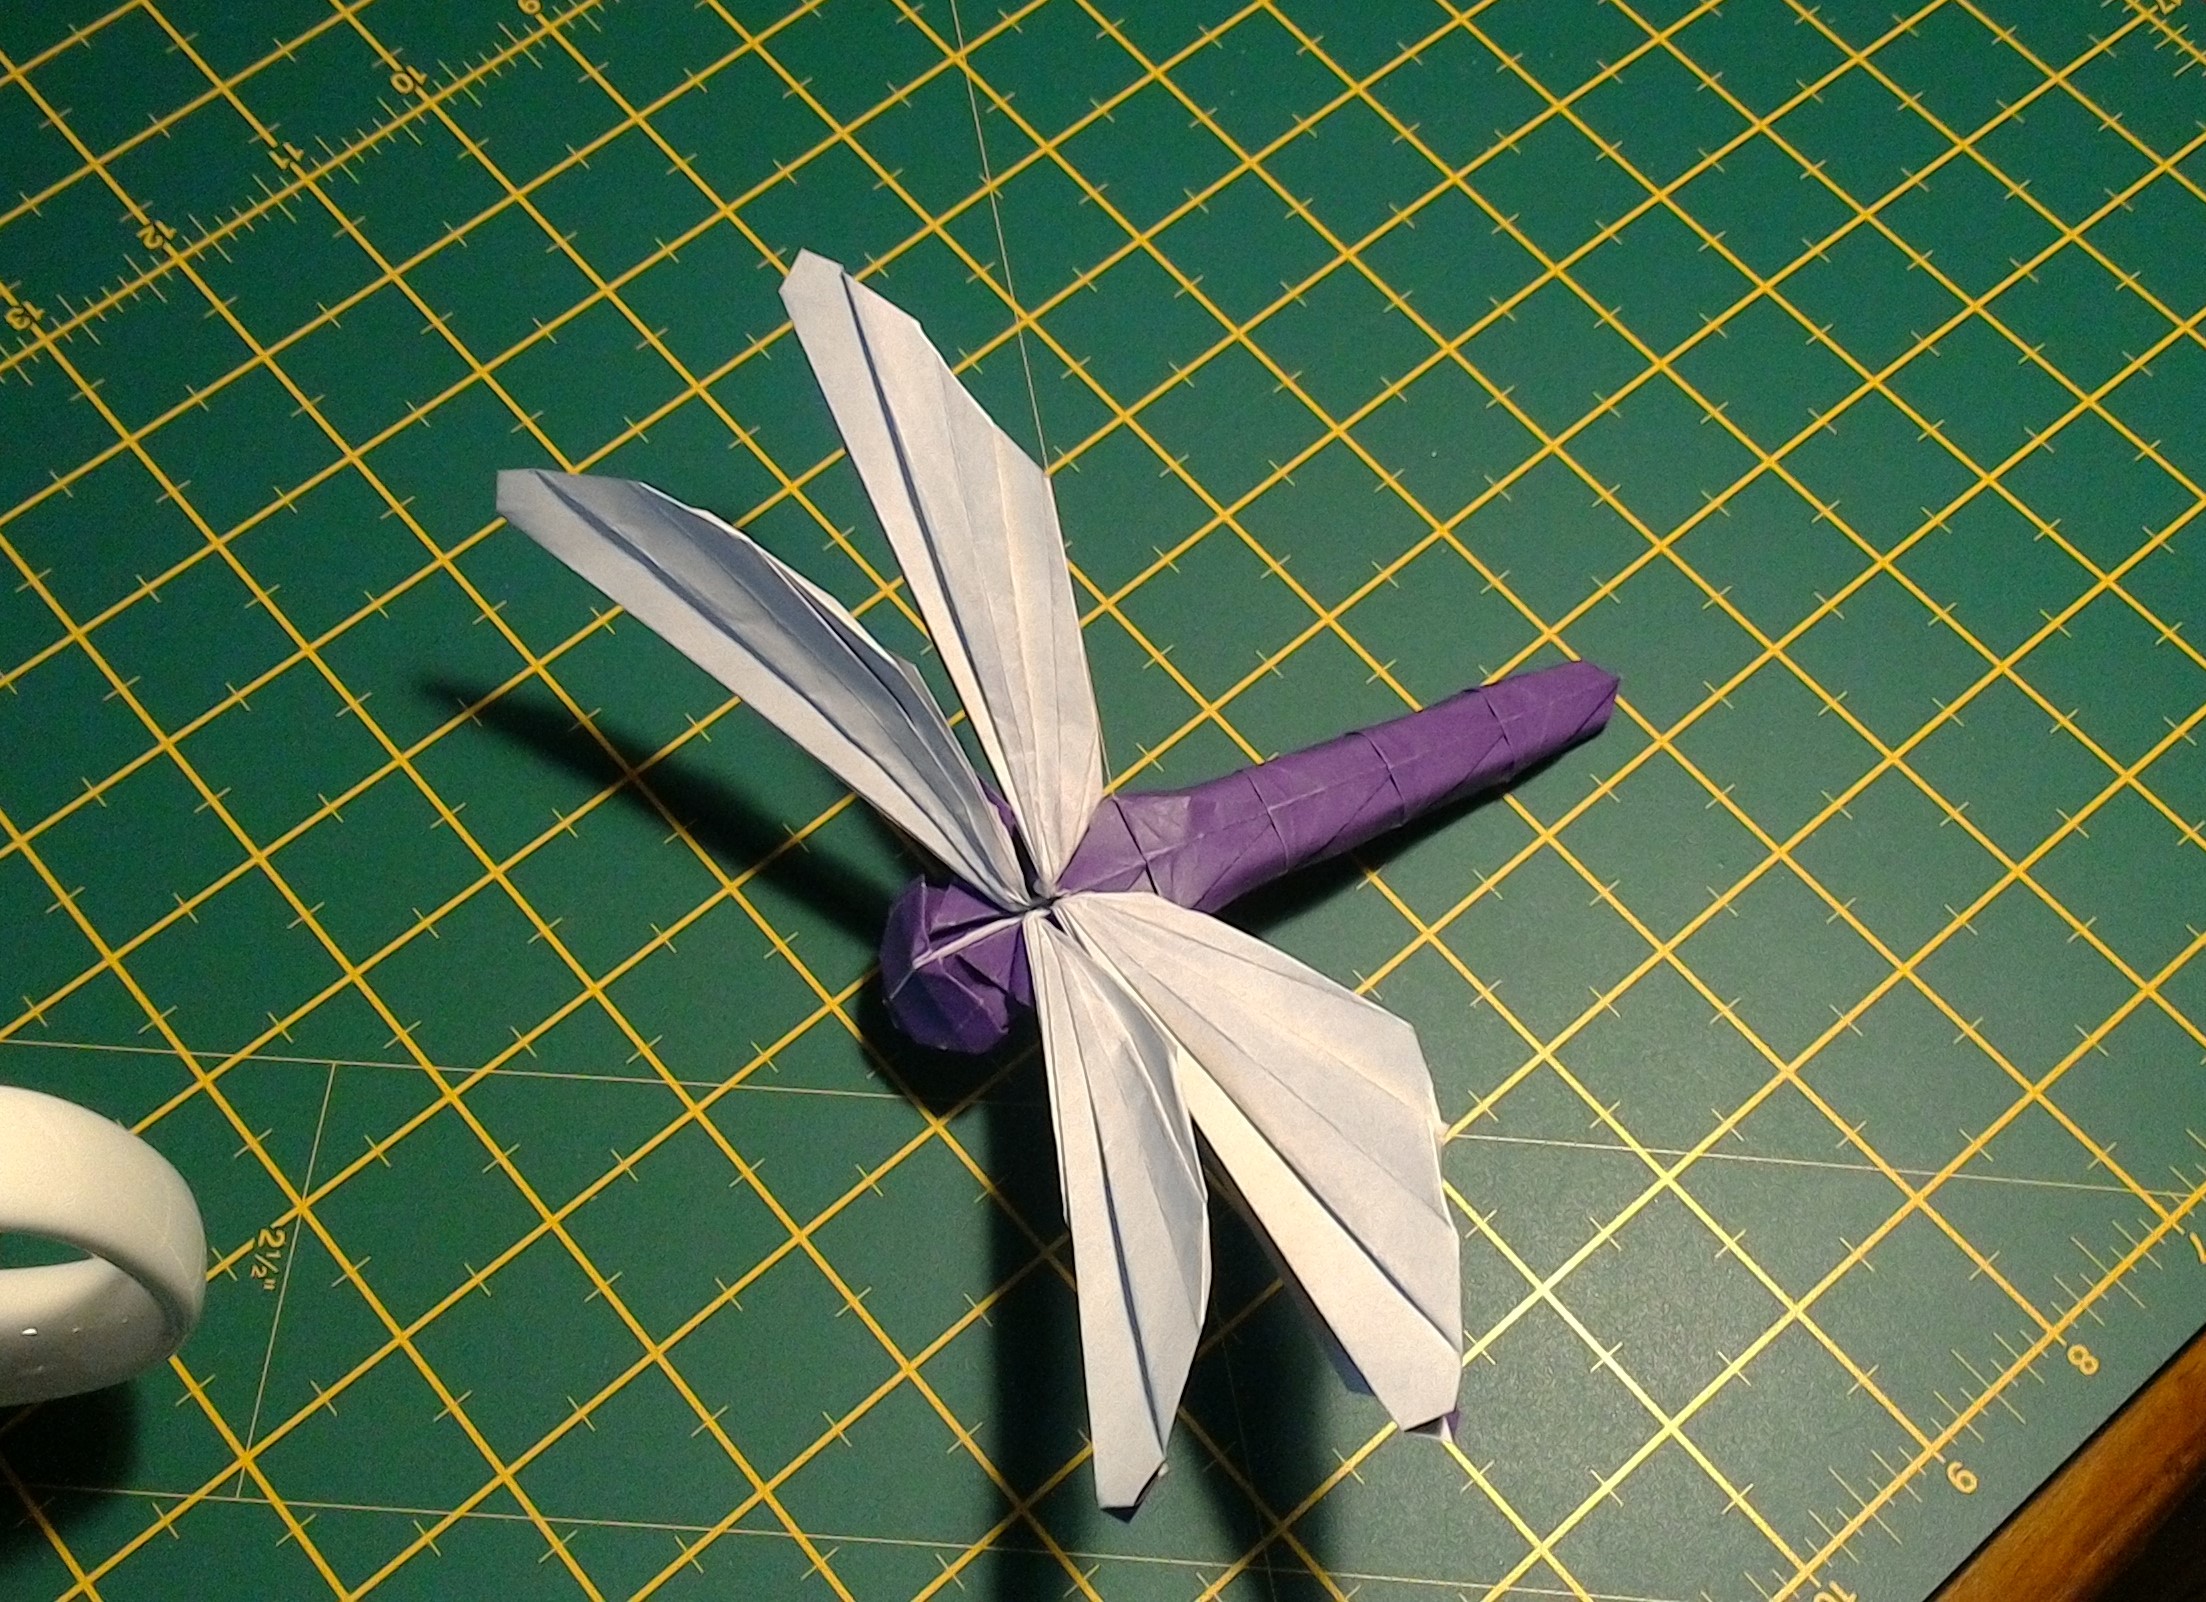 Simple Dragonfly